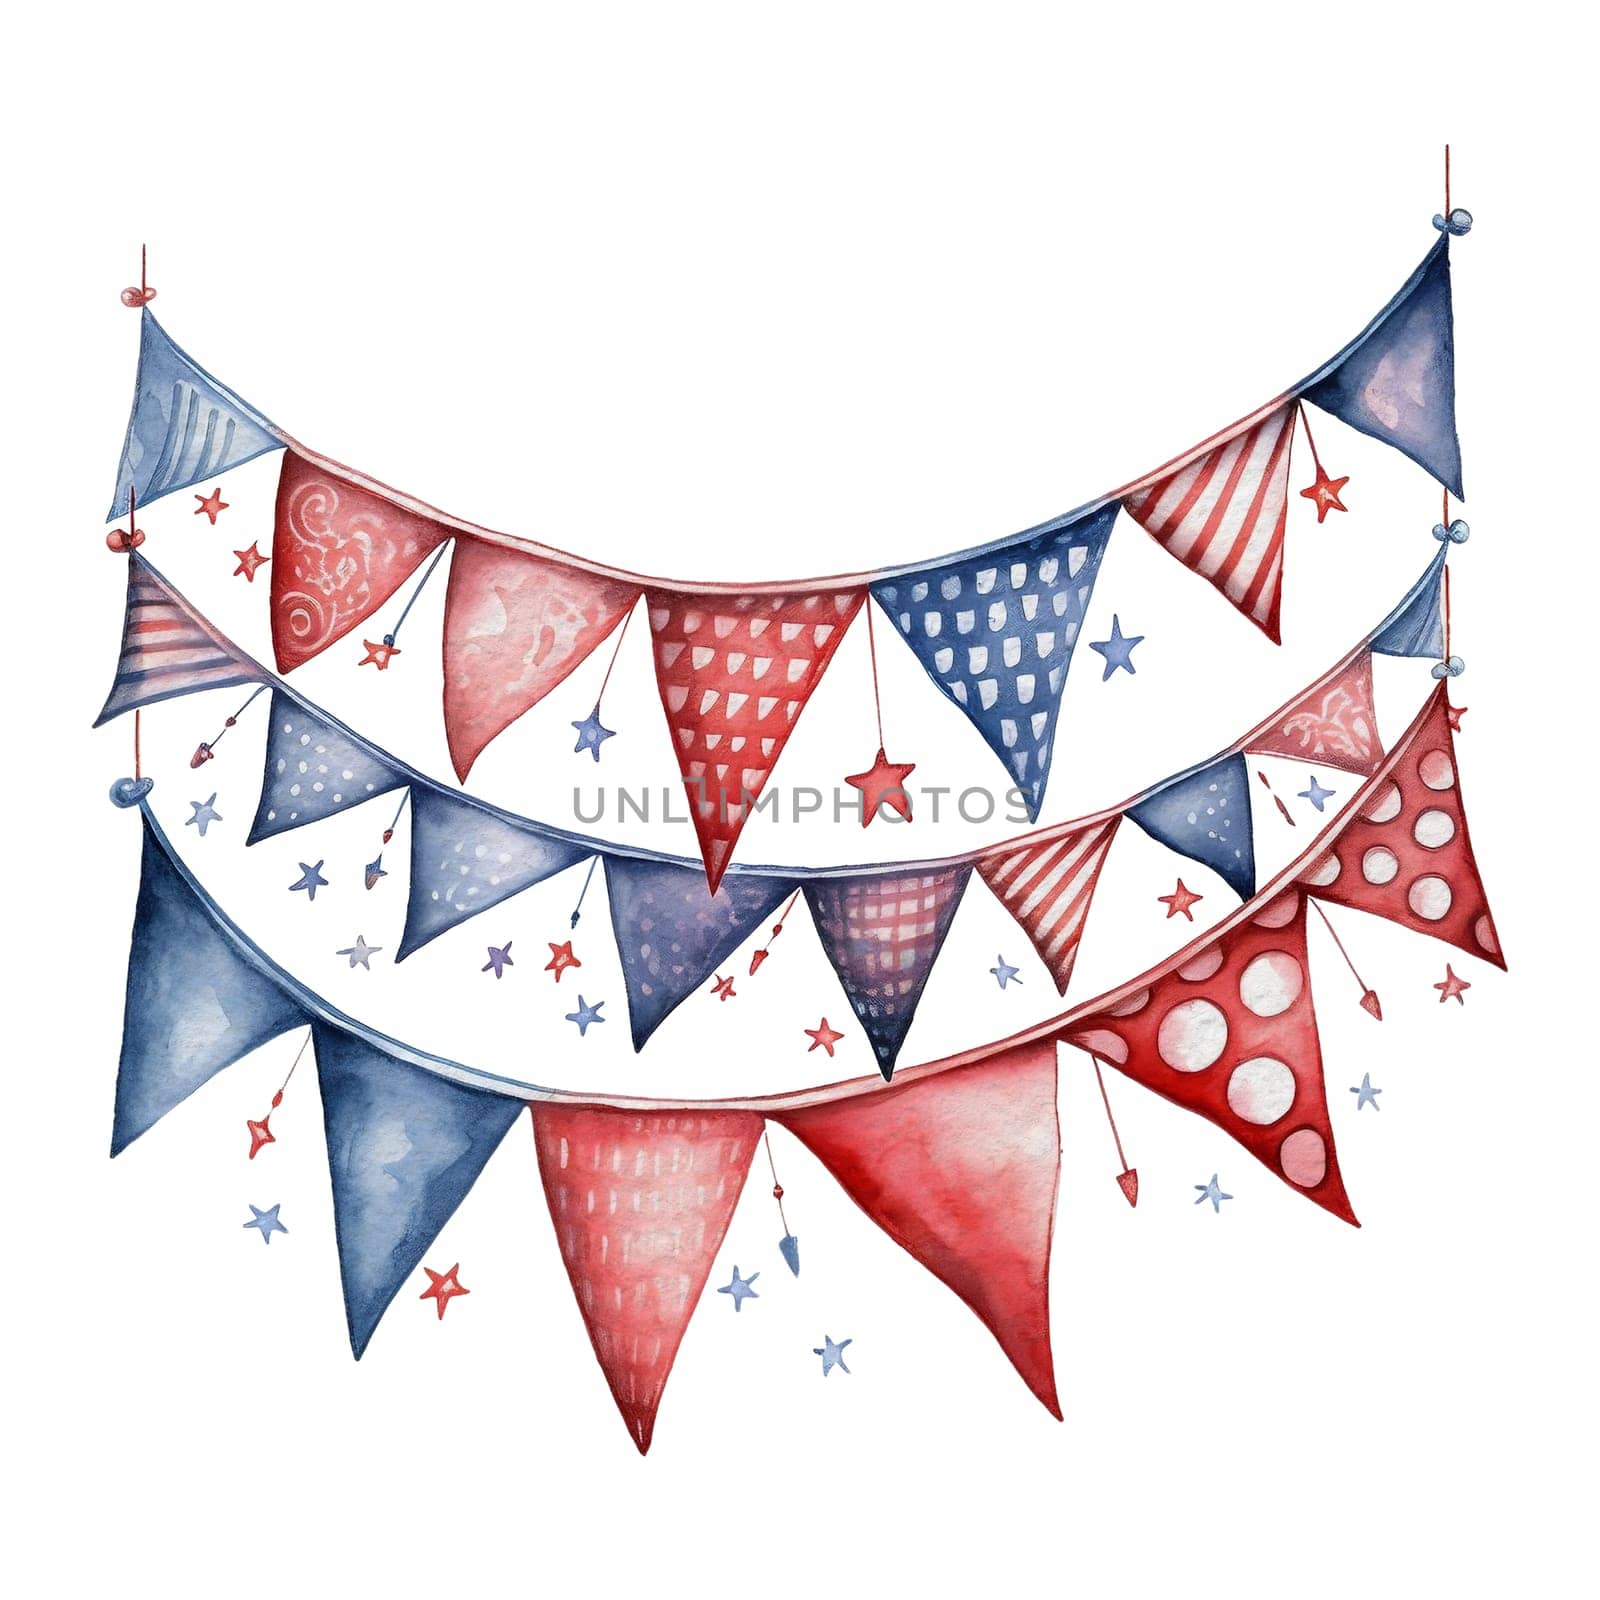 Watercolor 4th of July Independence Day Party Flags Cosy Decoration Illustration Clipart by Skyecreativestudio